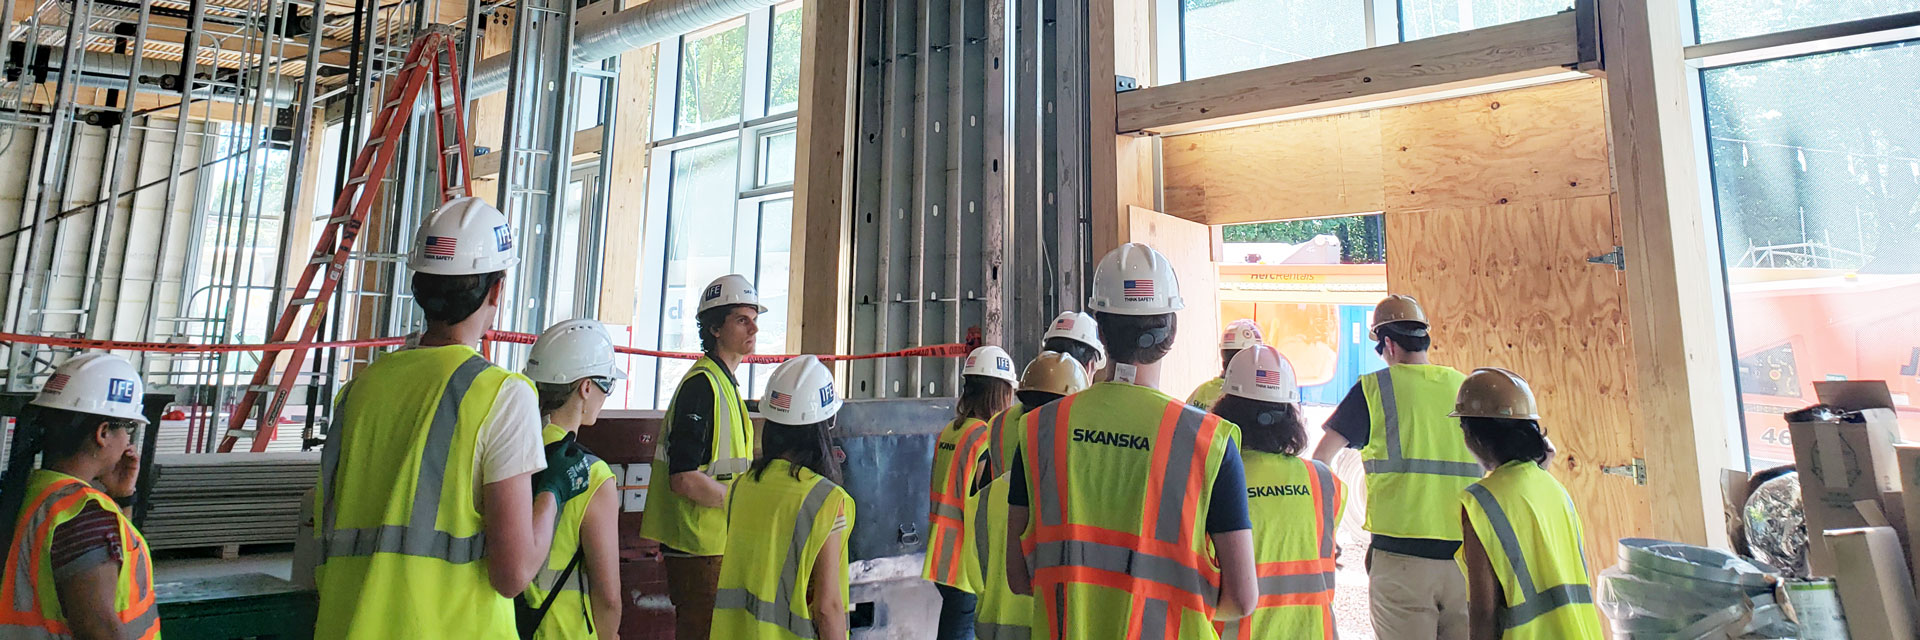 Students at construction site tour of the Kendeda Building.